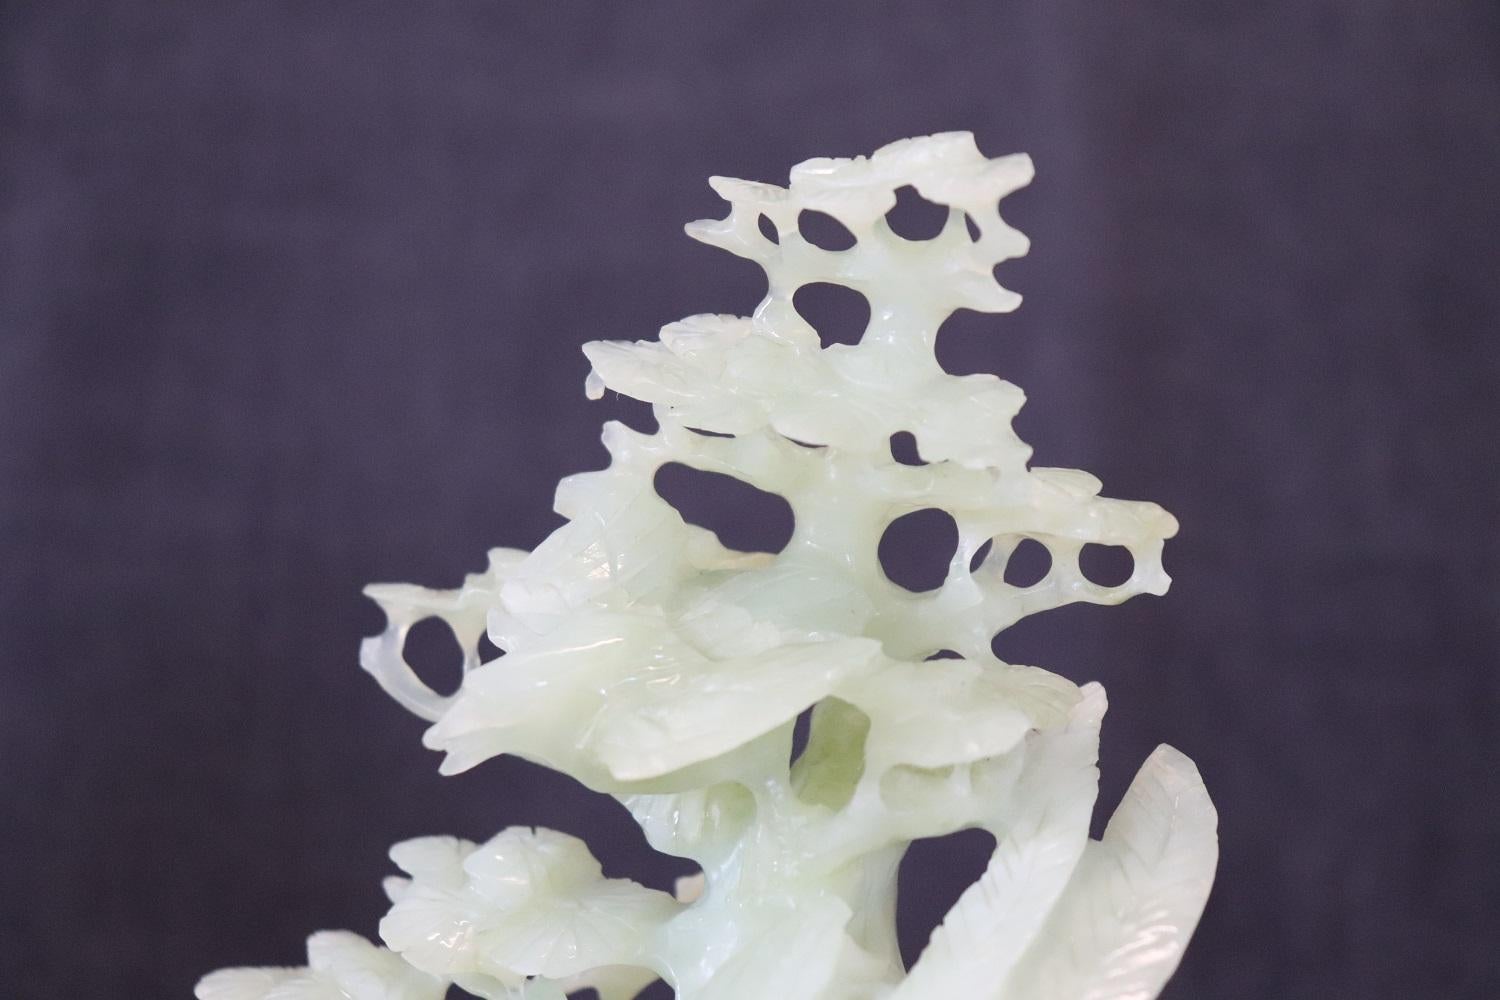 20th century Beautiful sculpture in precious green jade made in china. High artistic quality a tree with many leaves among whose branches some birds can be seen. The sculpture rests on a wooden base. Perfect conditions.